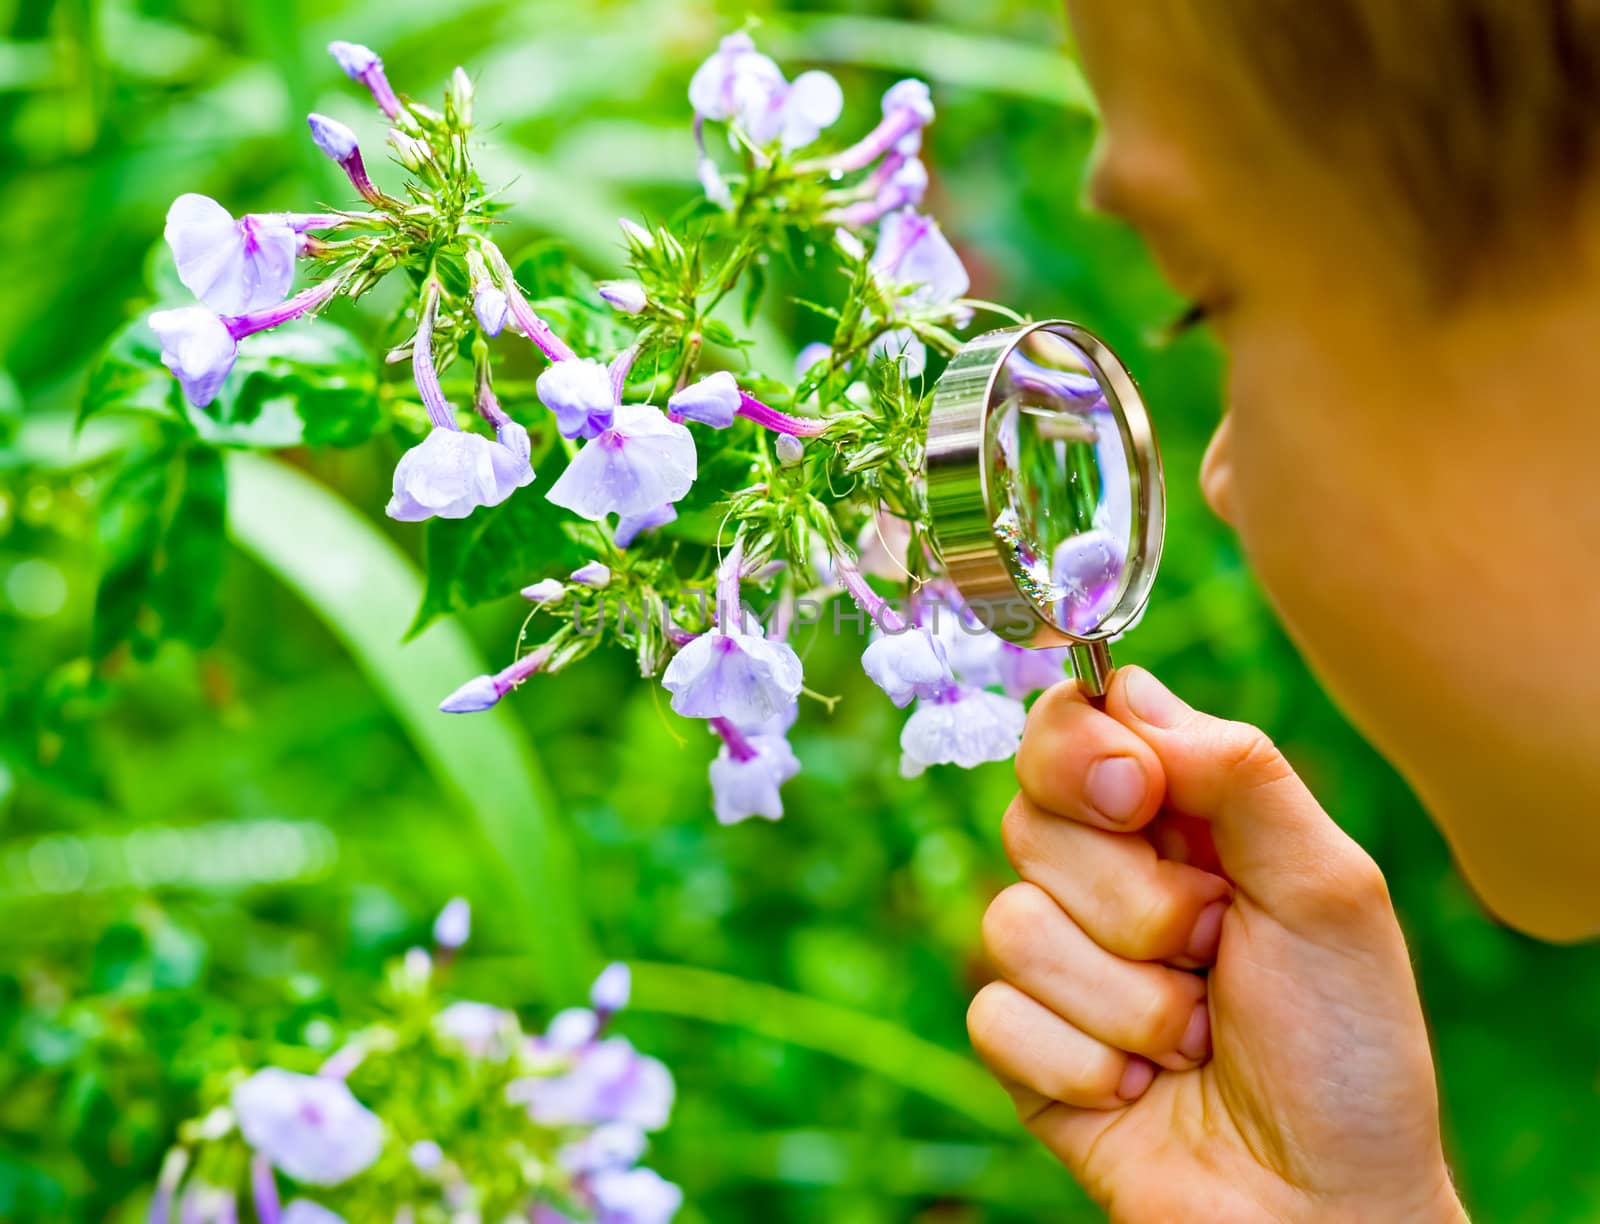 Young boy looking at flower through hand magnifier, shallow DOF